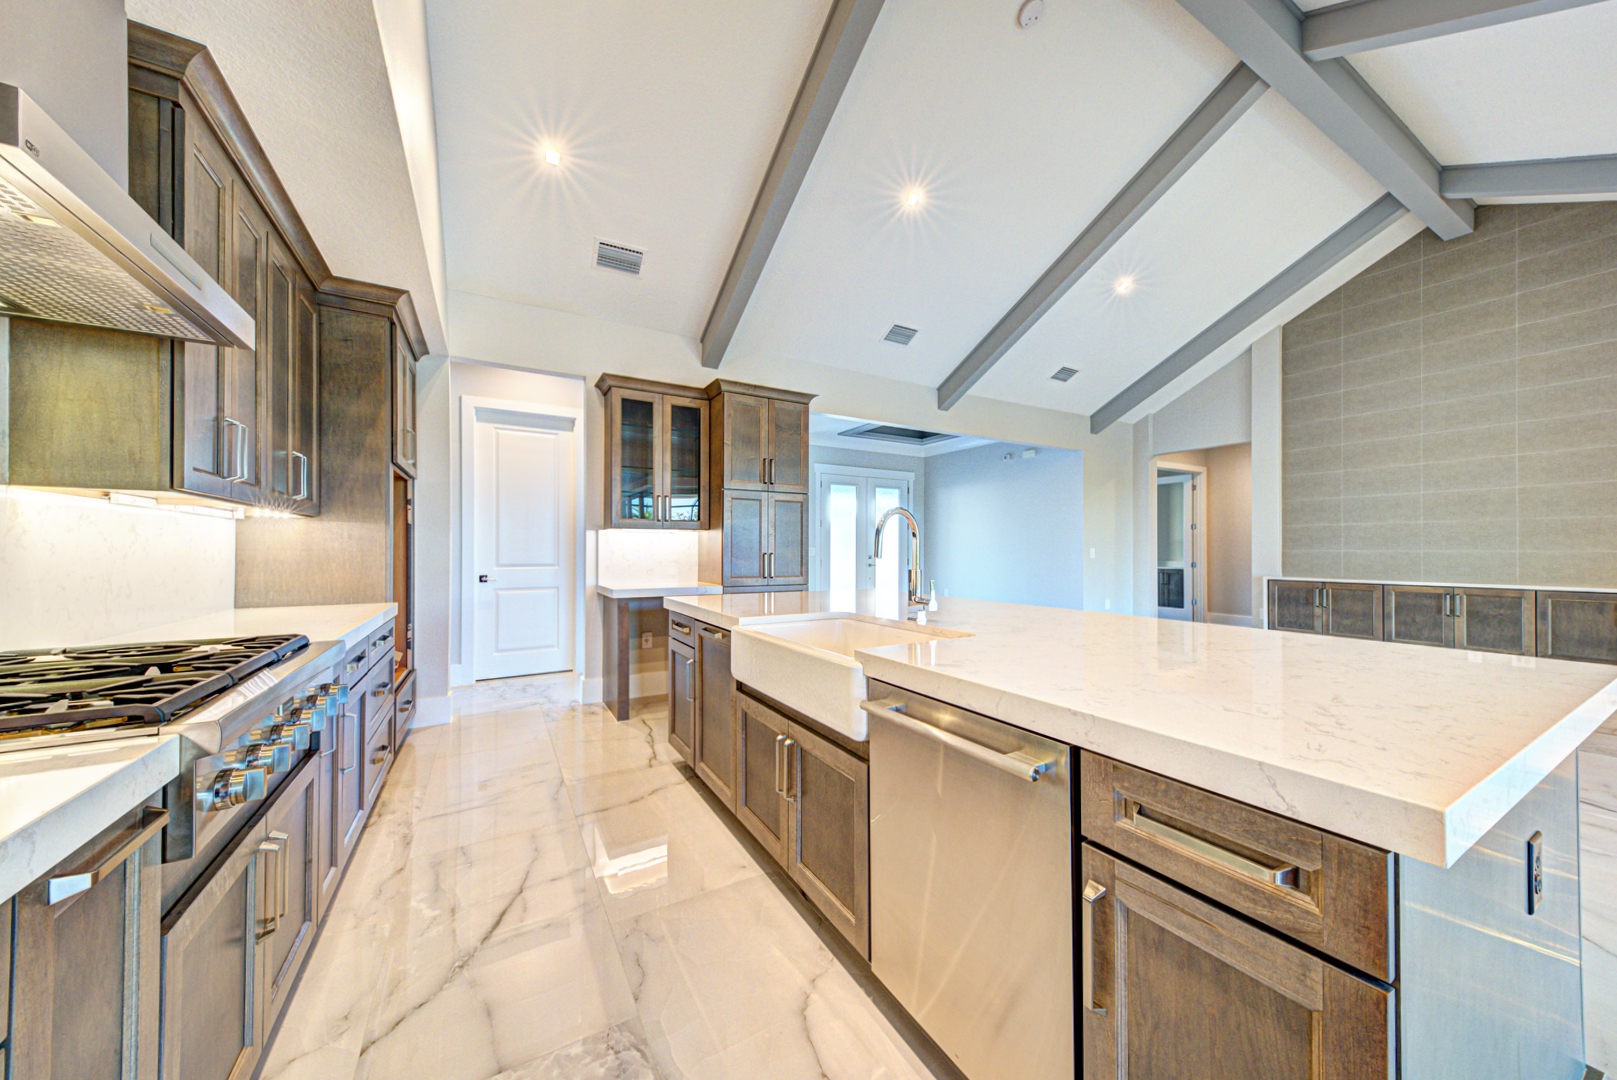 Custom Kitchen and Bathroom Design and Installation on the Space Coast by Hammond Kitchens and Bath in Melbourne